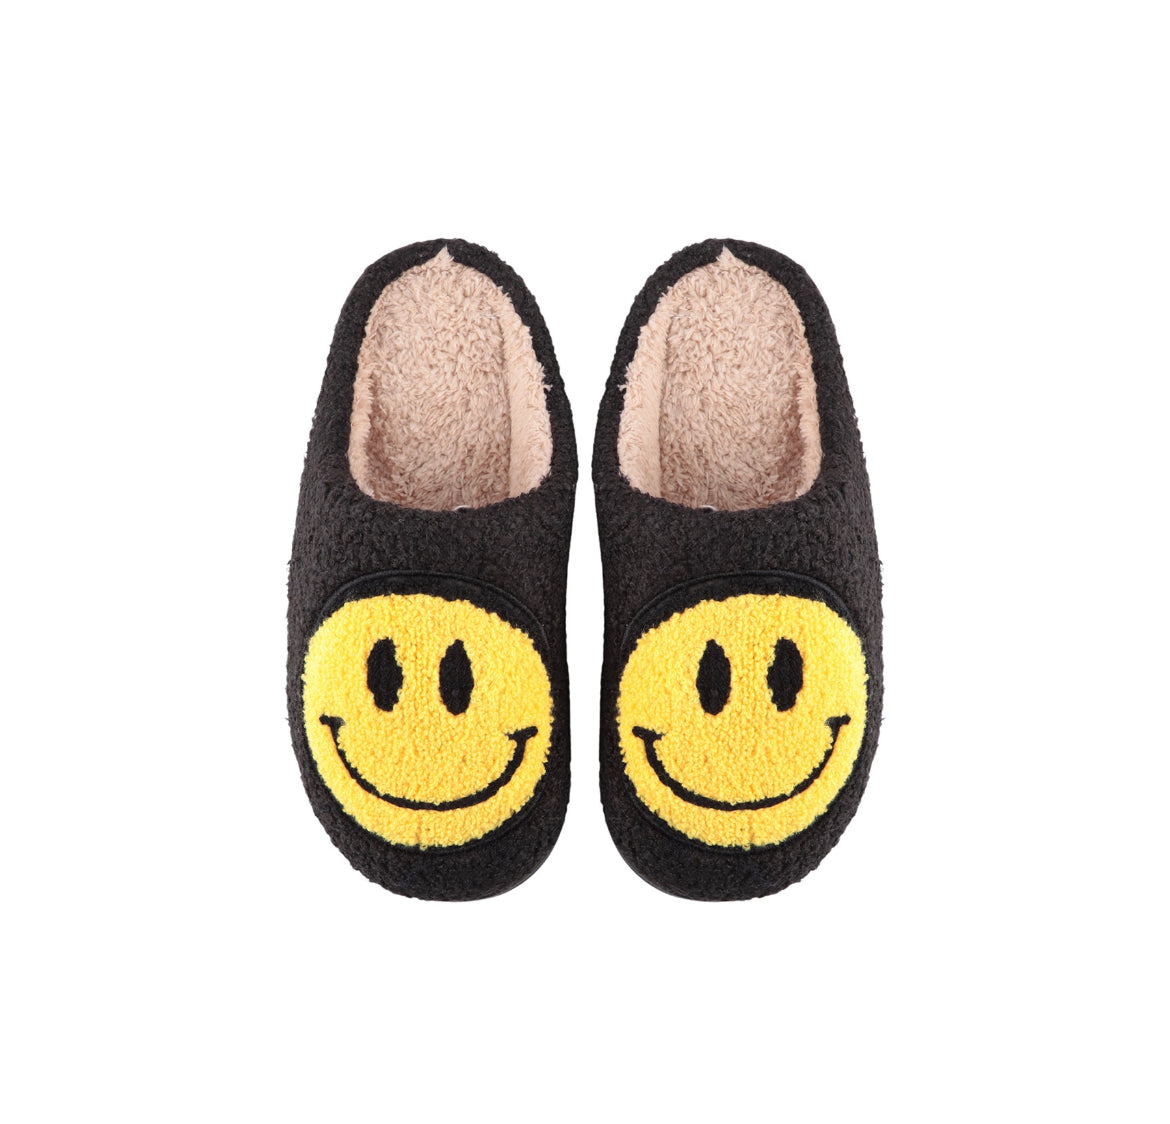 Smiley Face Fuzzy Slippers in Black